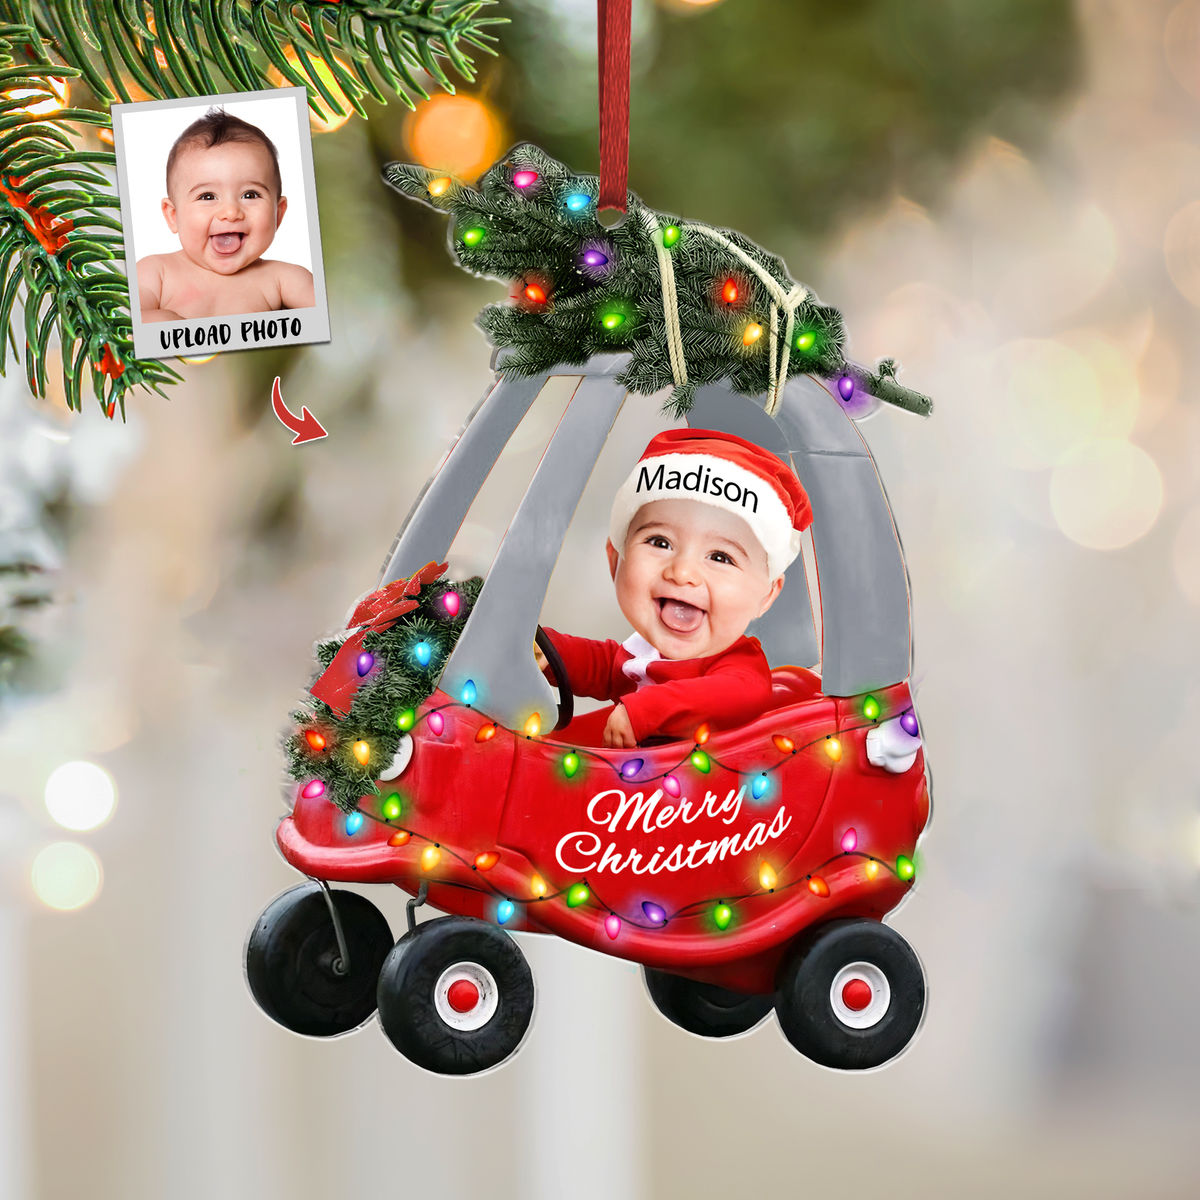 Photo Ornament - Adorable Newborn Baby - Baby Christmas - Custom Ornament from Photo - Christmas Gifts For Dad, Mom, Family_3